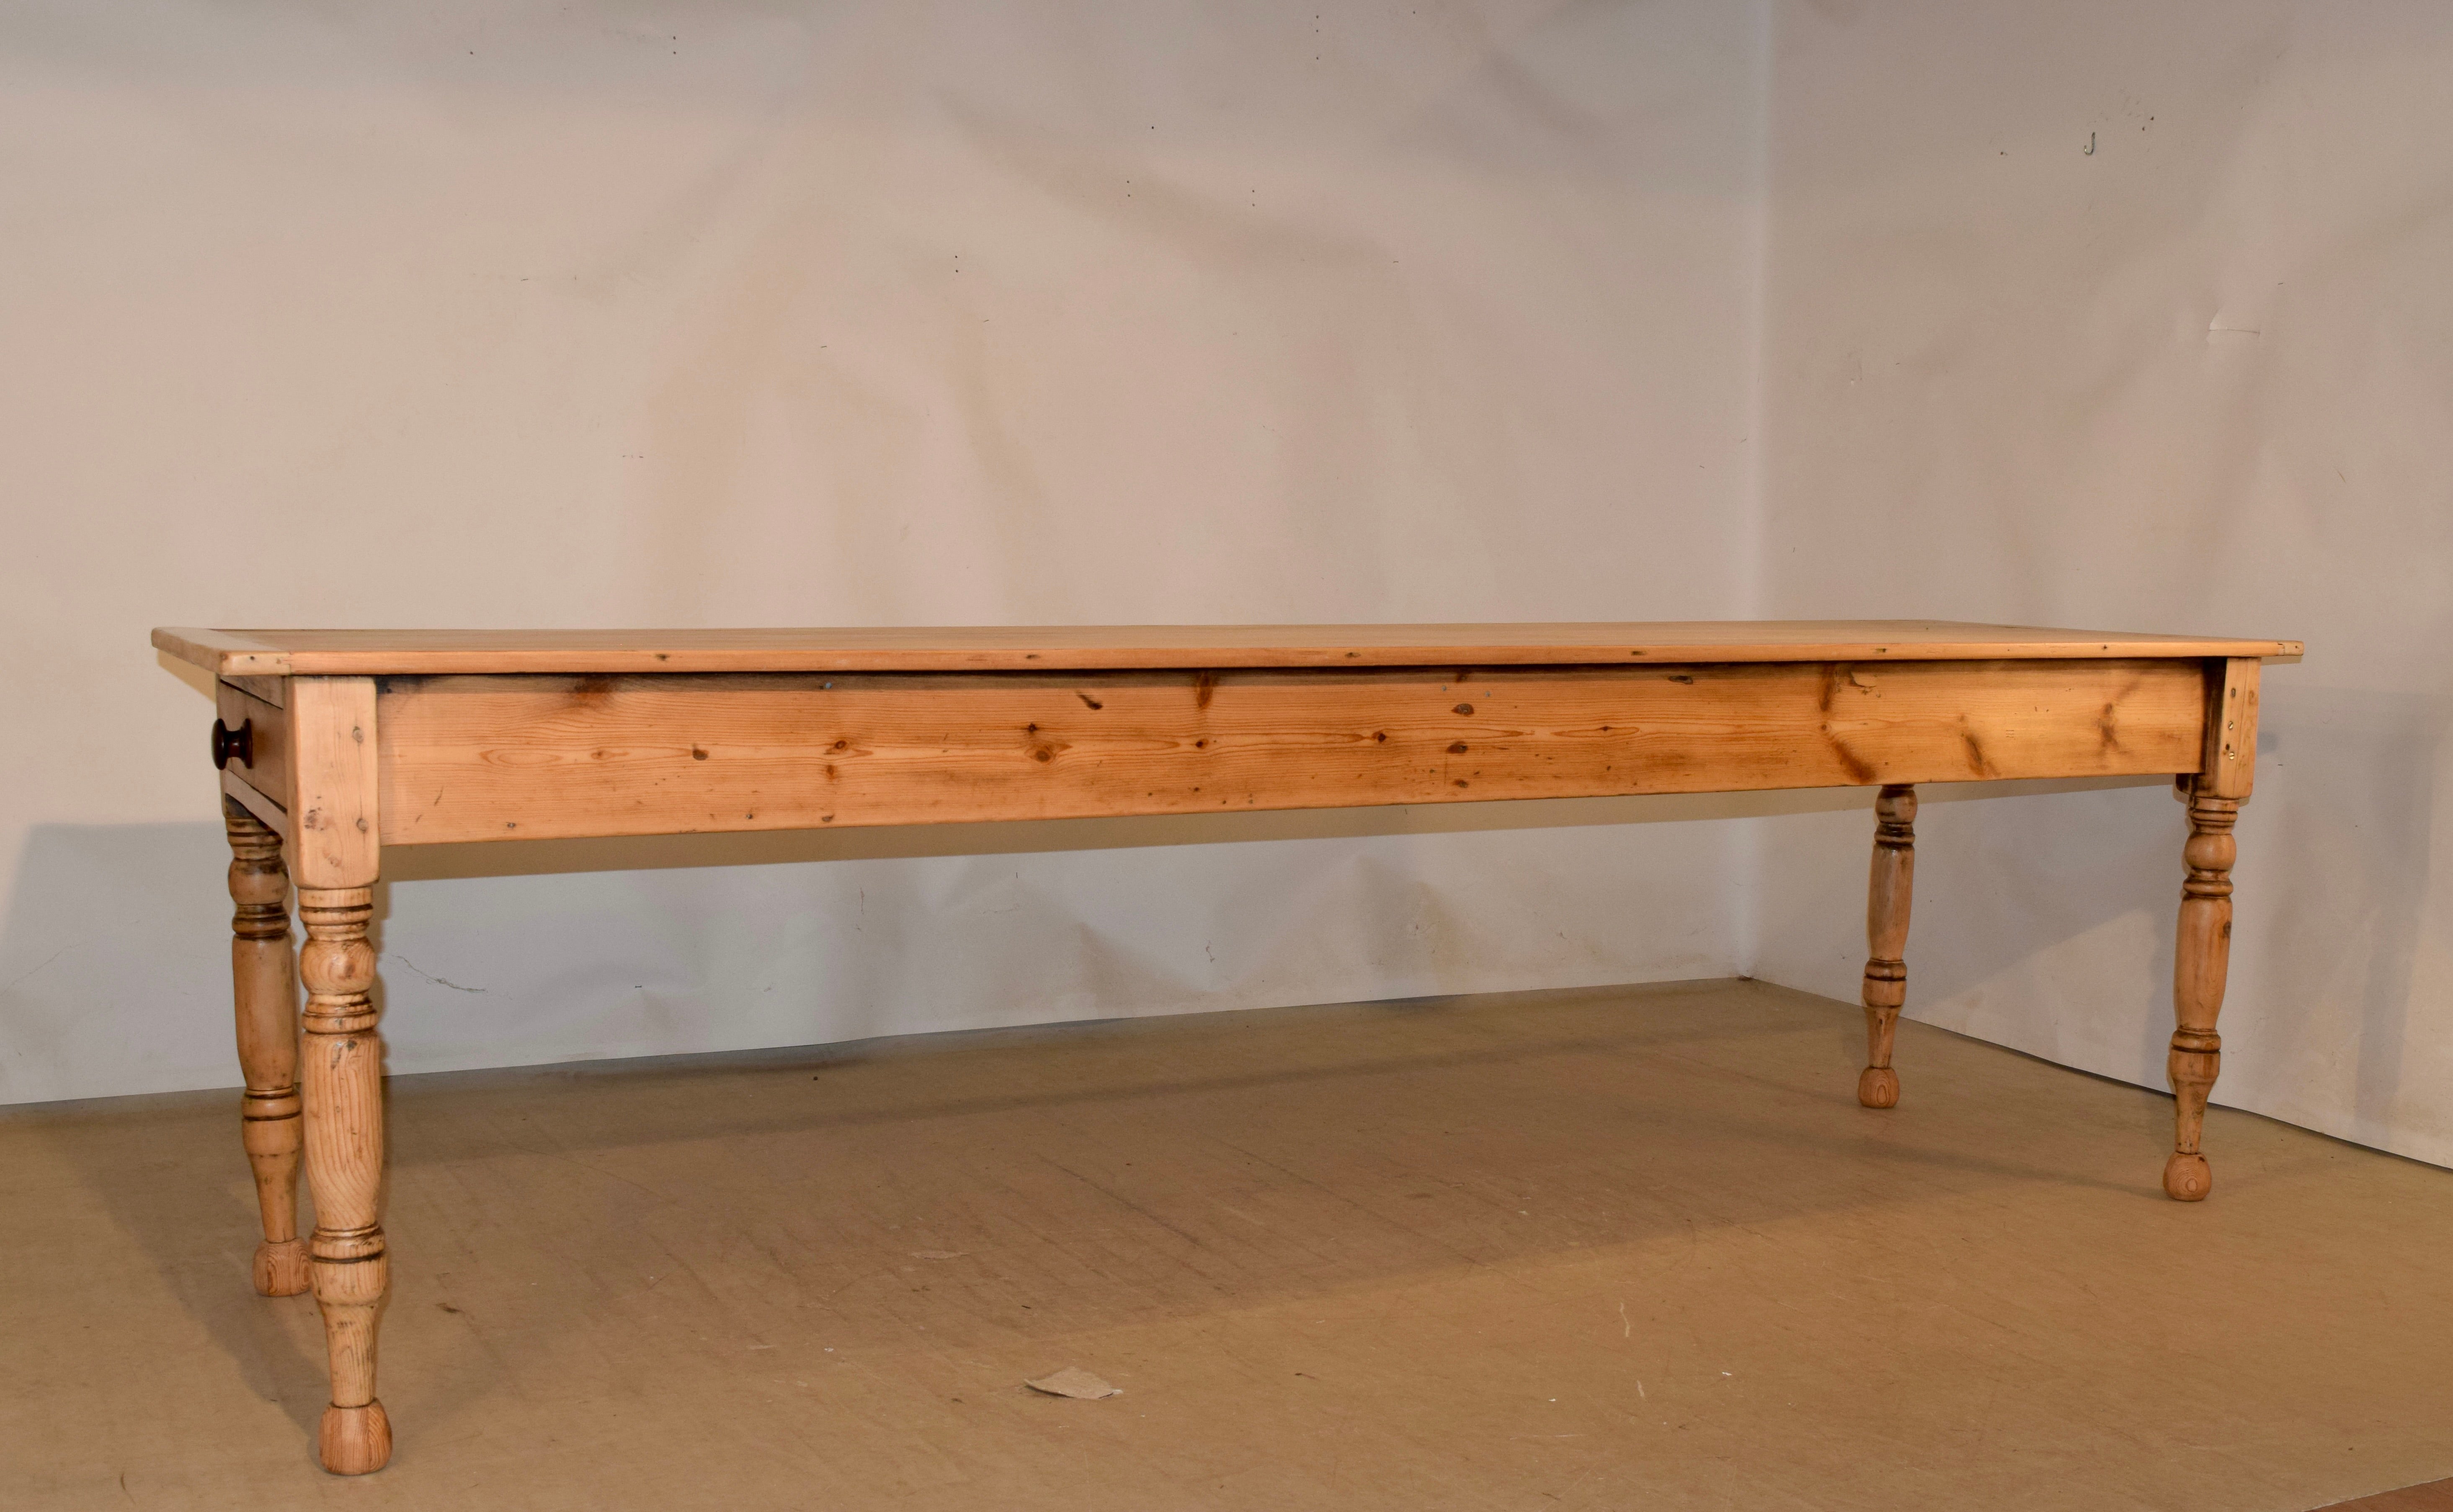 19th century English farm table made of pine. The top is made from five planks, and is banded on the ends with sycamore wood to prevent shrinkage. The apron is simple apron and contains a single drawer on one end. The table is supported on hand